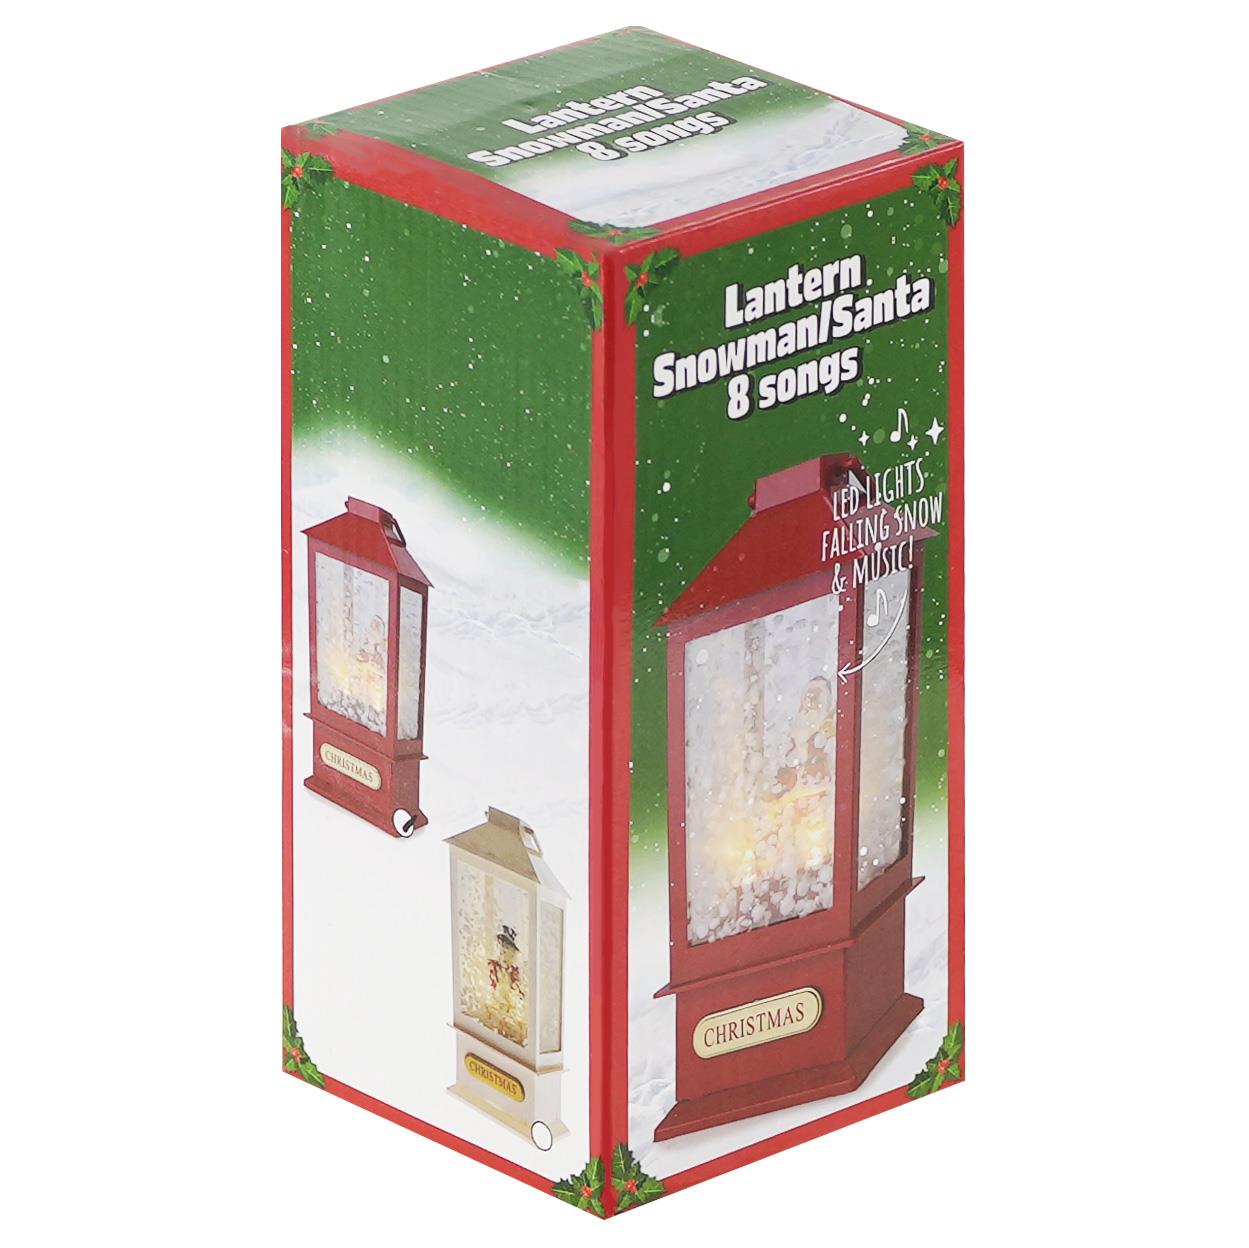 The Magic Toy Shop Home Christmas Lantern With 8 Songs, Light And Snow